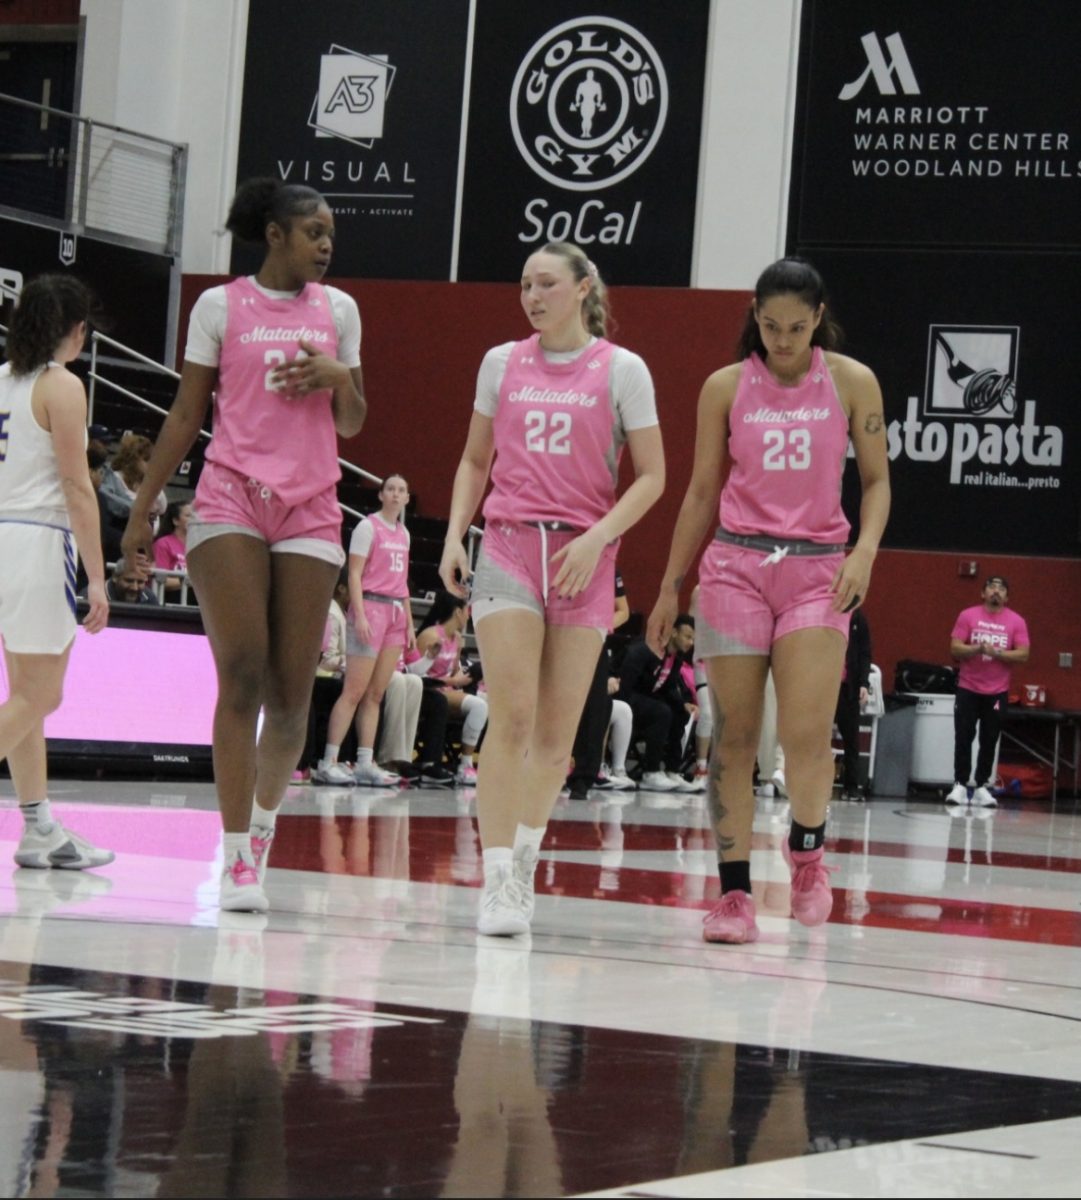 Forward+Talo+Li-Uperesa%2C+guard+Kaitlyn+Elsholz+and+forward+Kayanna+Spriggs+talk+about+a+play+that+was+drawn+up+after+a+timeout+at+the+Premier+America+Credit+Union+Arena+on+Jan.+10+in+Northridge%2C+Calif.